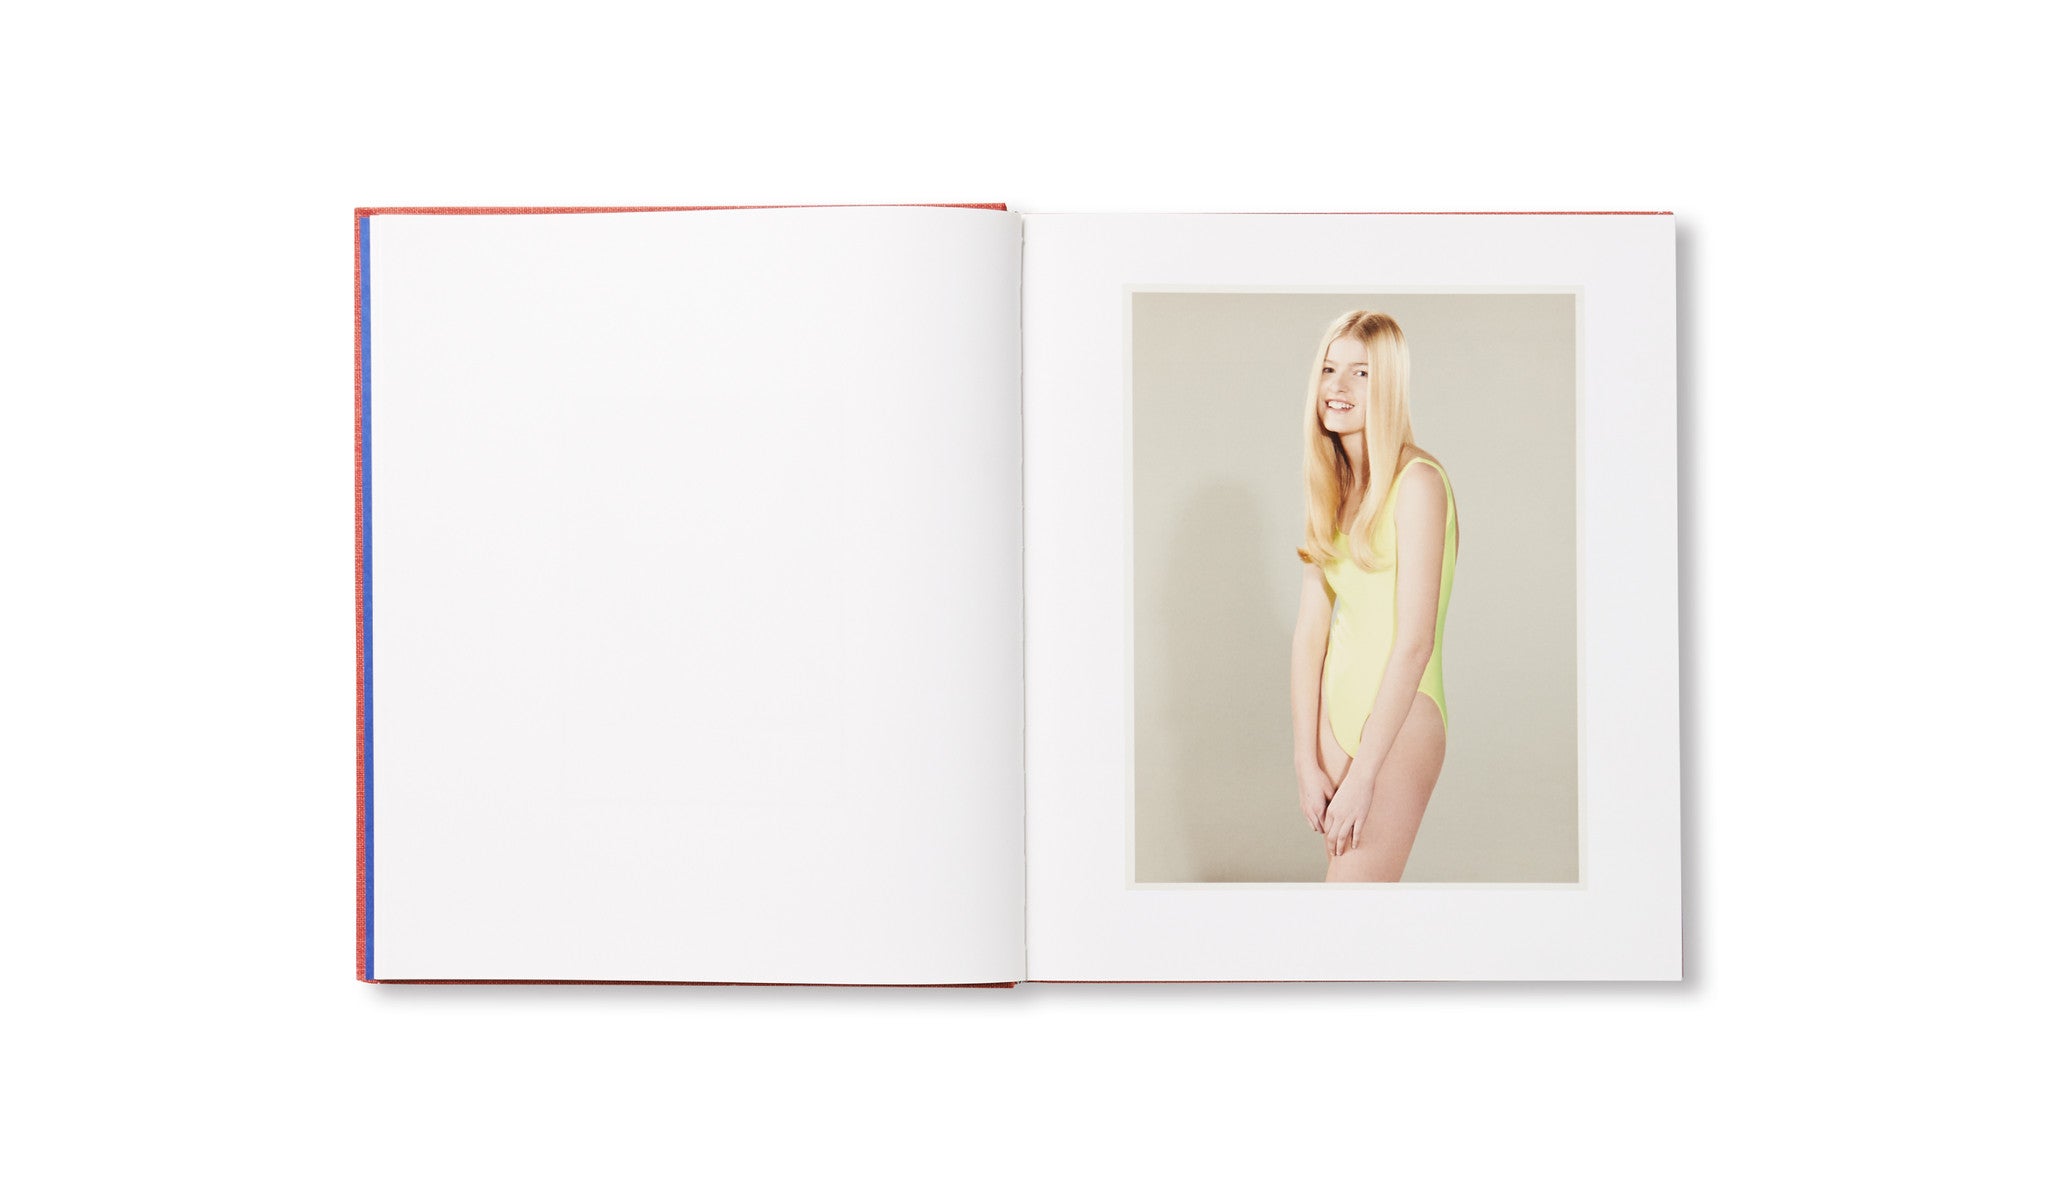 LE LUXE by Roe Ethridge [SECOND EDITION]